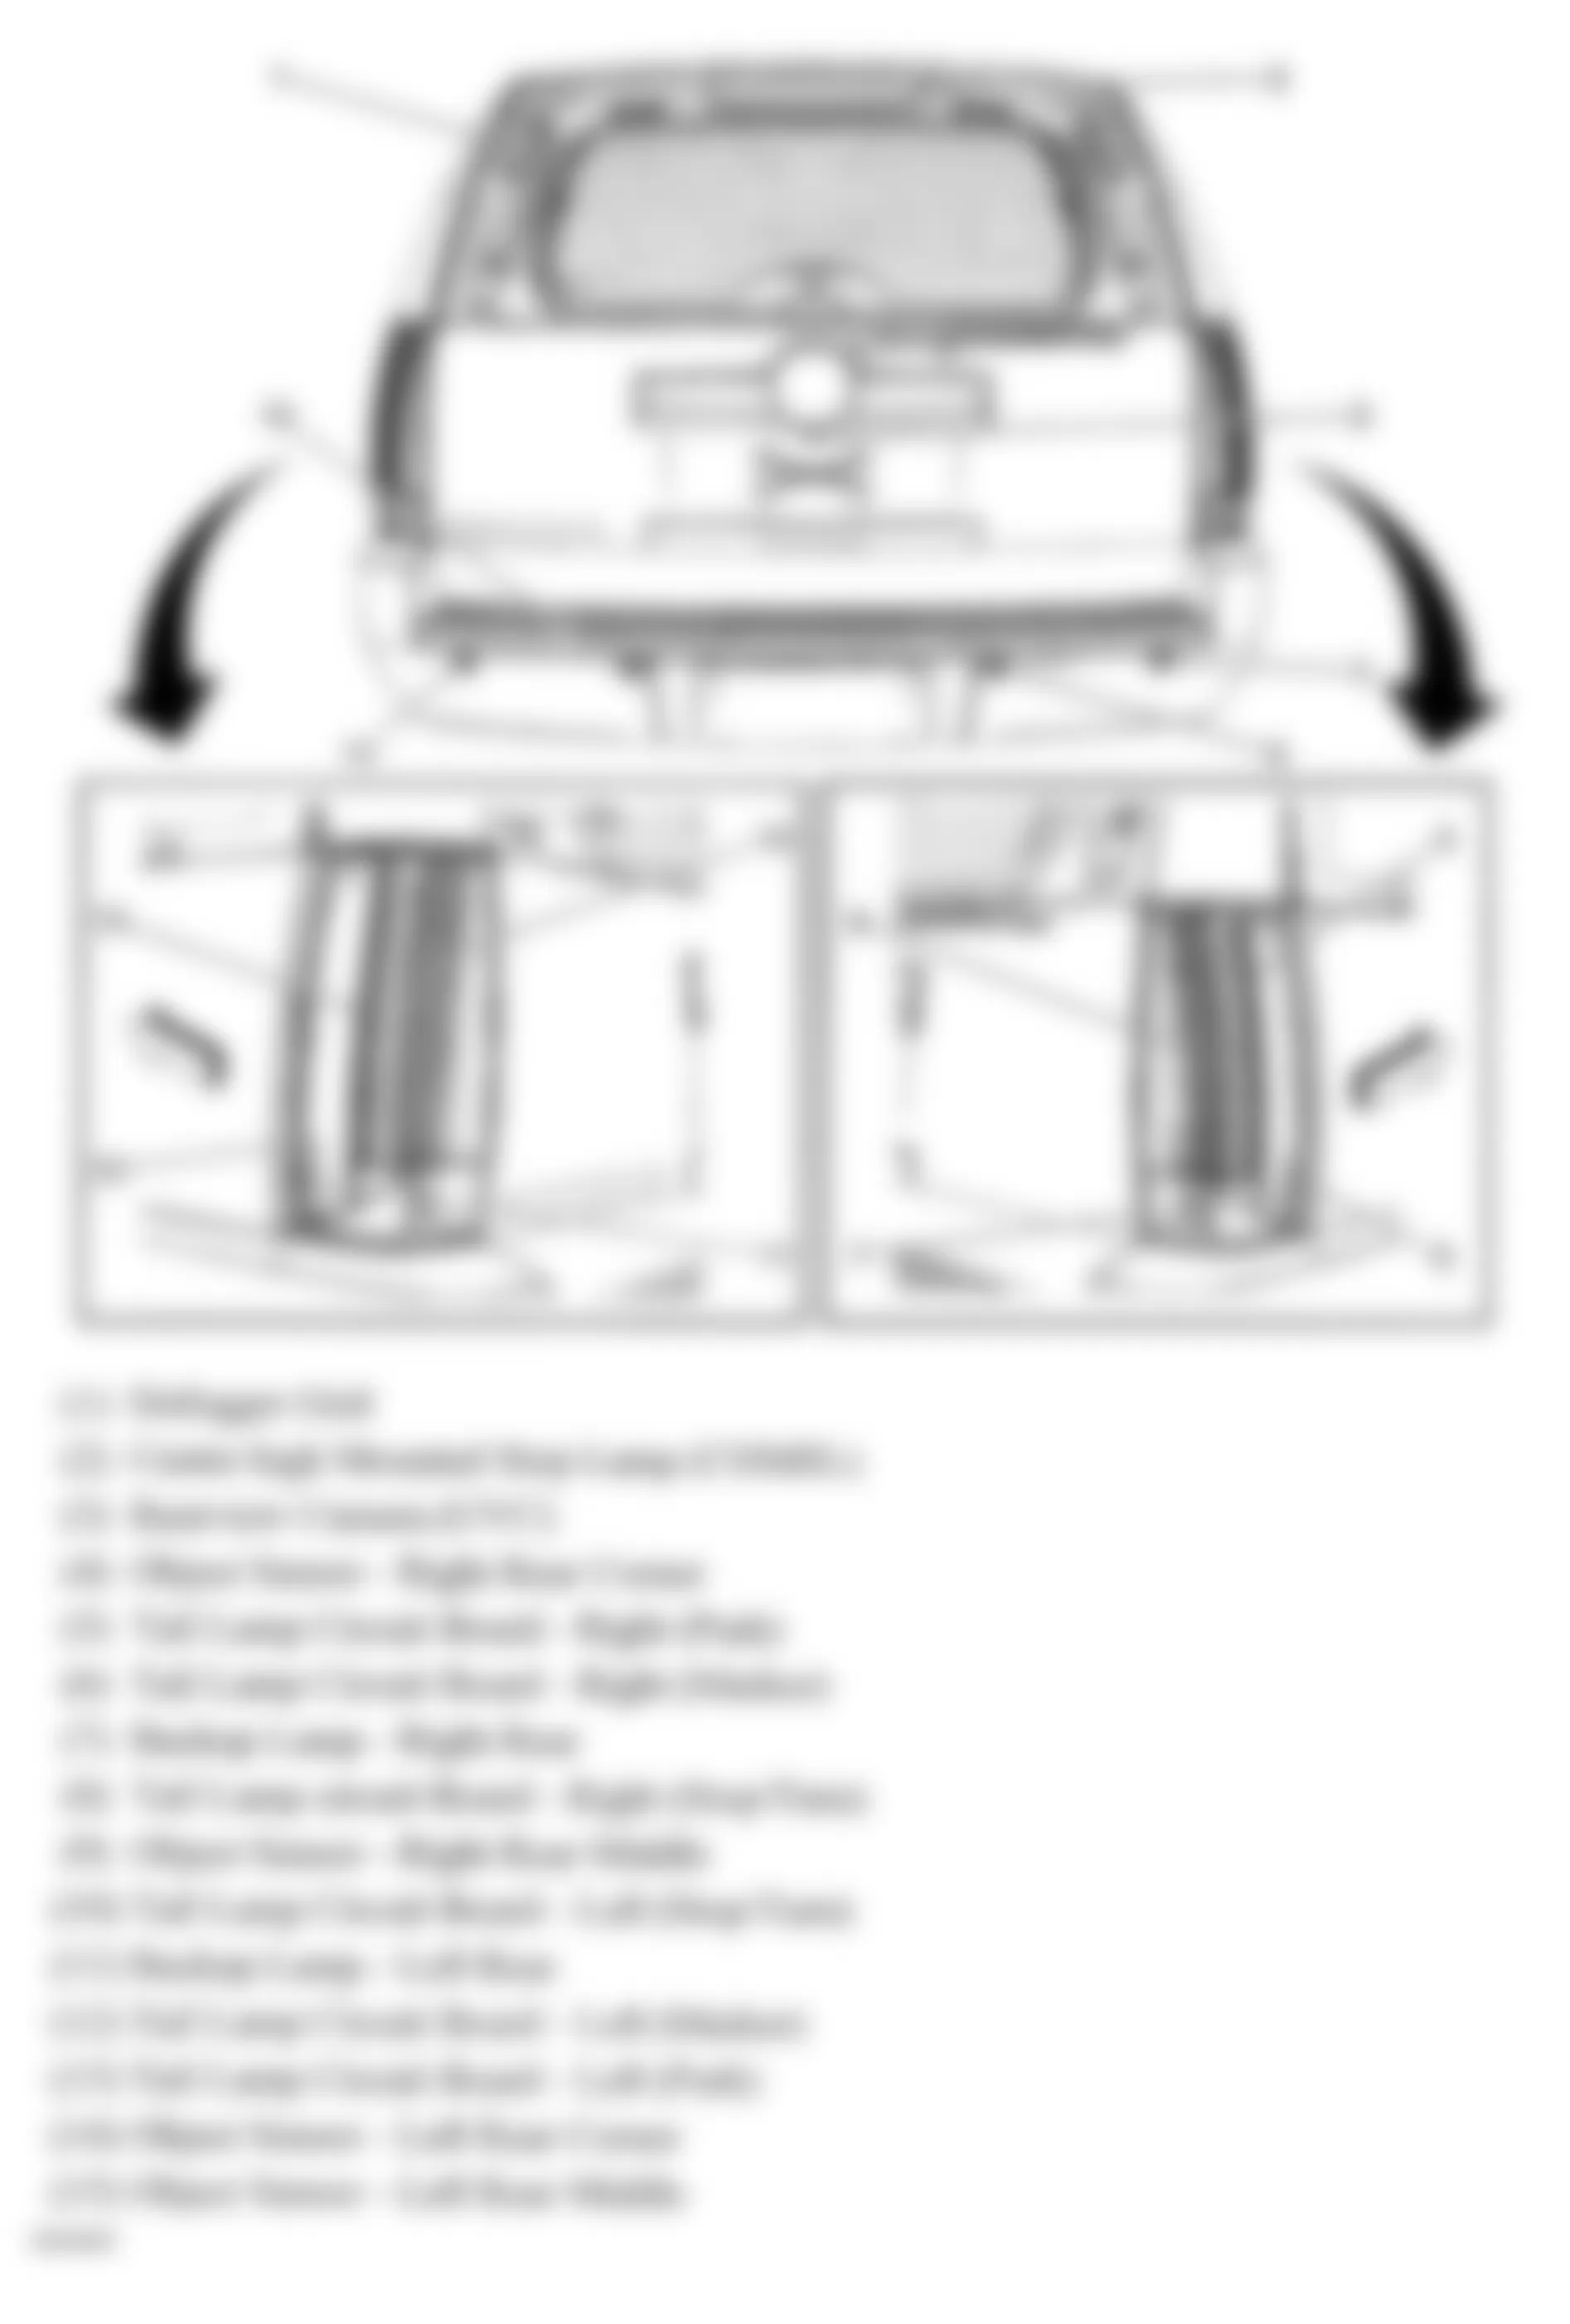 Chevrolet Tahoe 2010 - Component Locations -  Rear Of Vehicle (Tahoe & Escalade W/One Piece Liftgate)